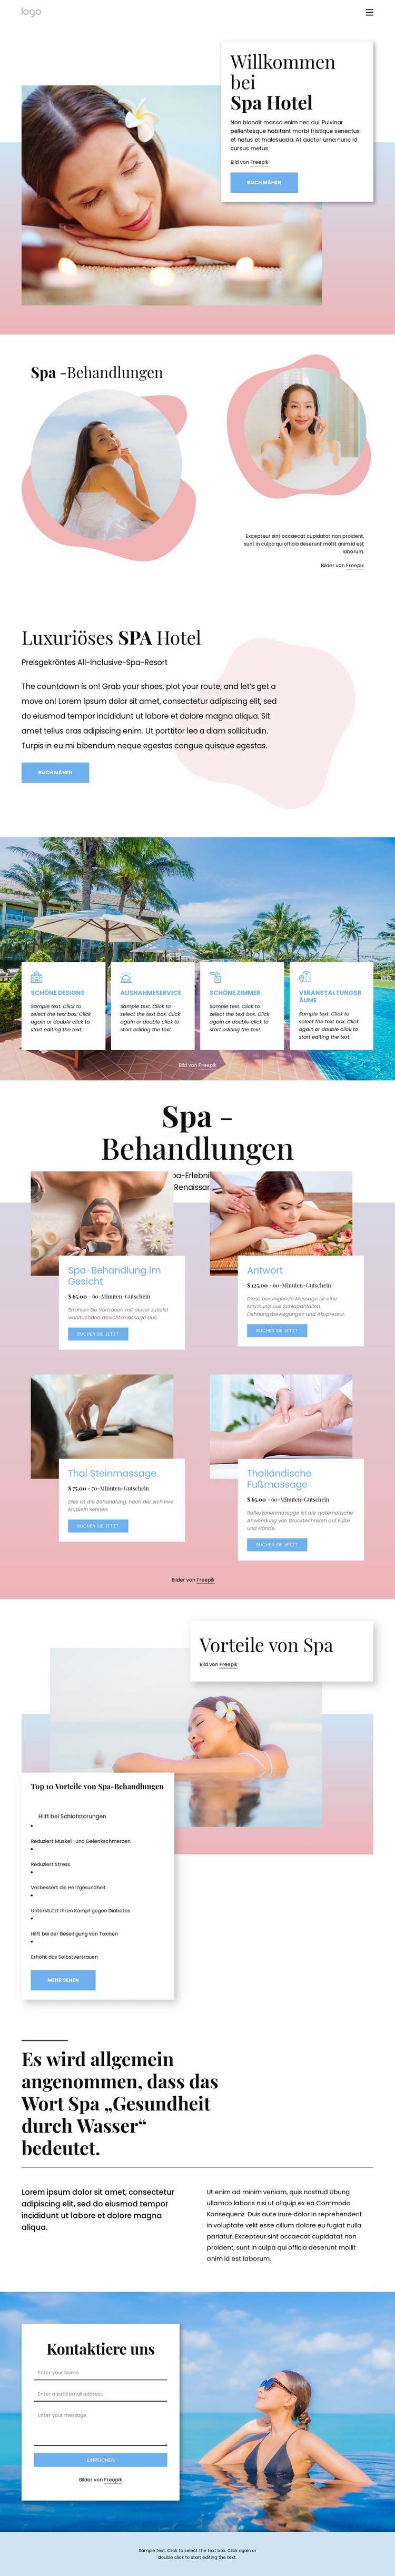 Spa Boutique Hotel Website-Modell